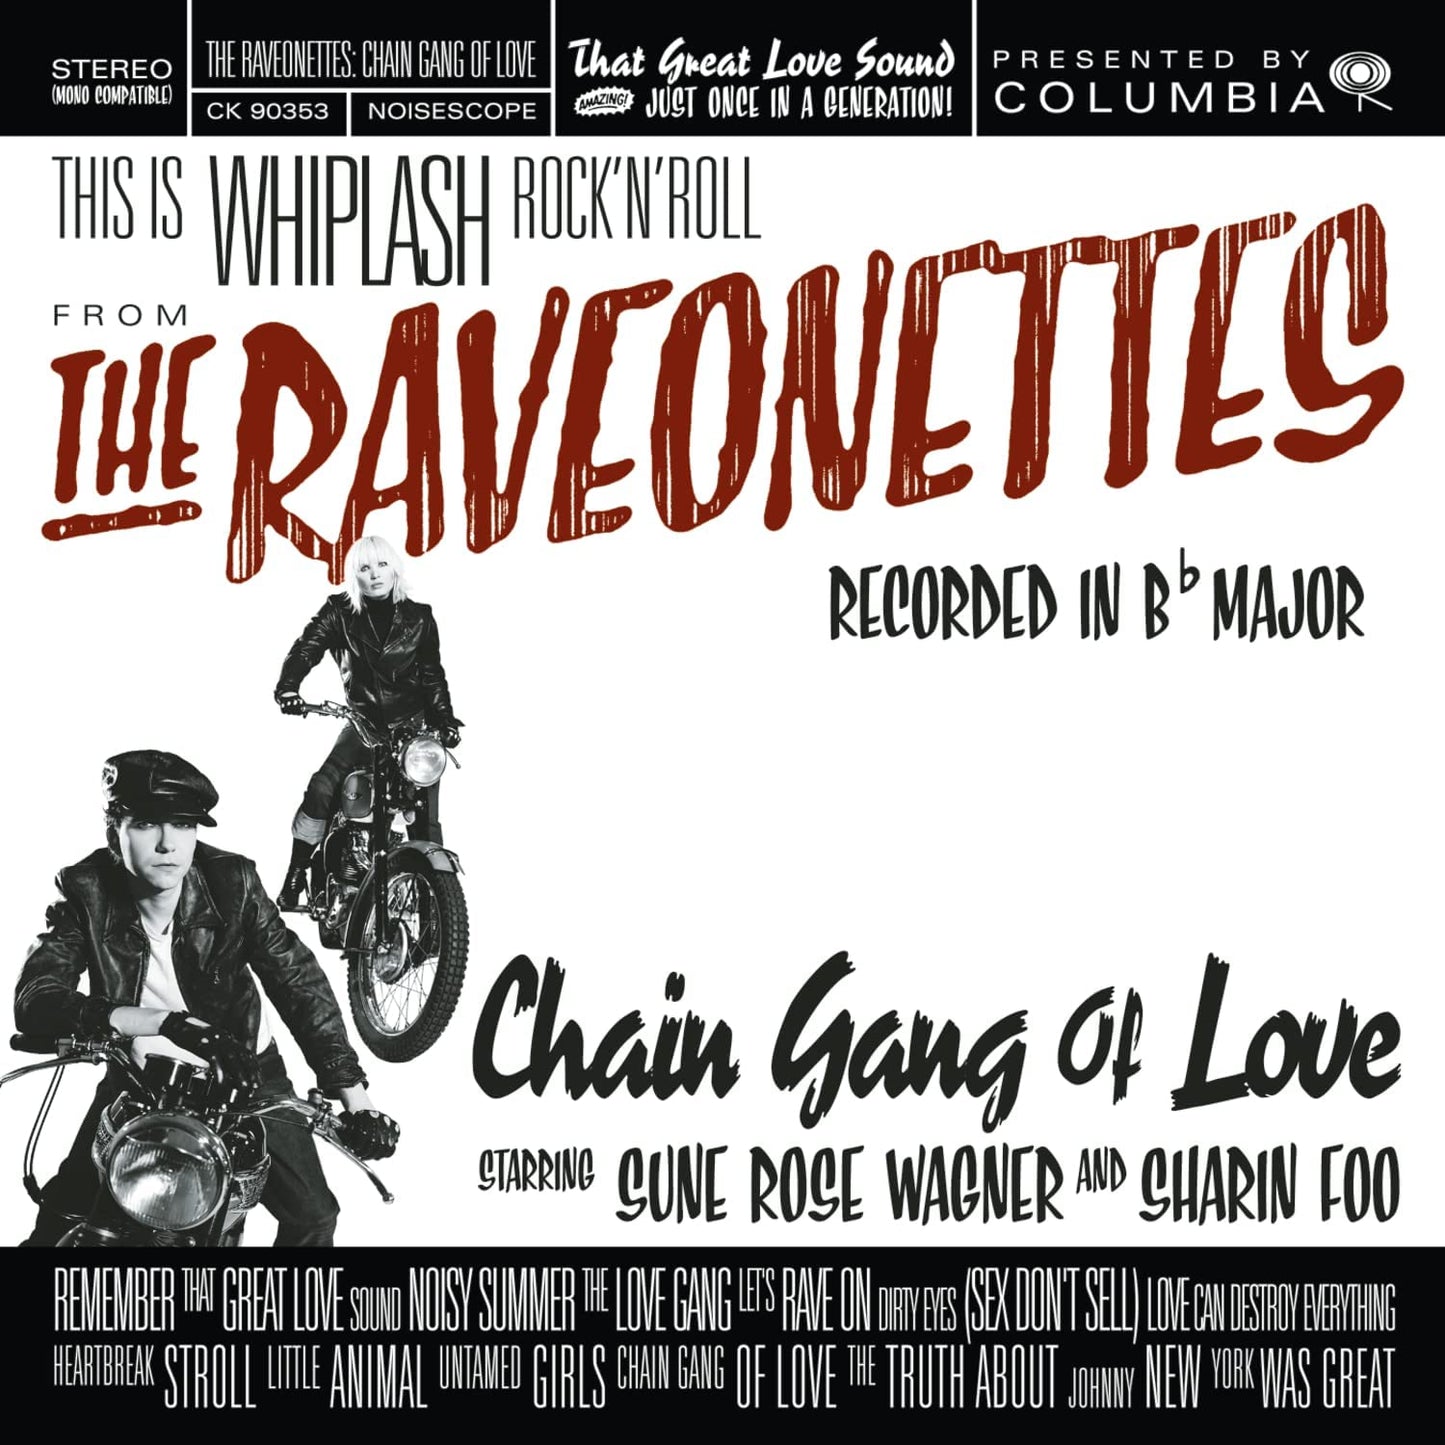 The Raveonettes – Chain Gang Of Love - USED CD